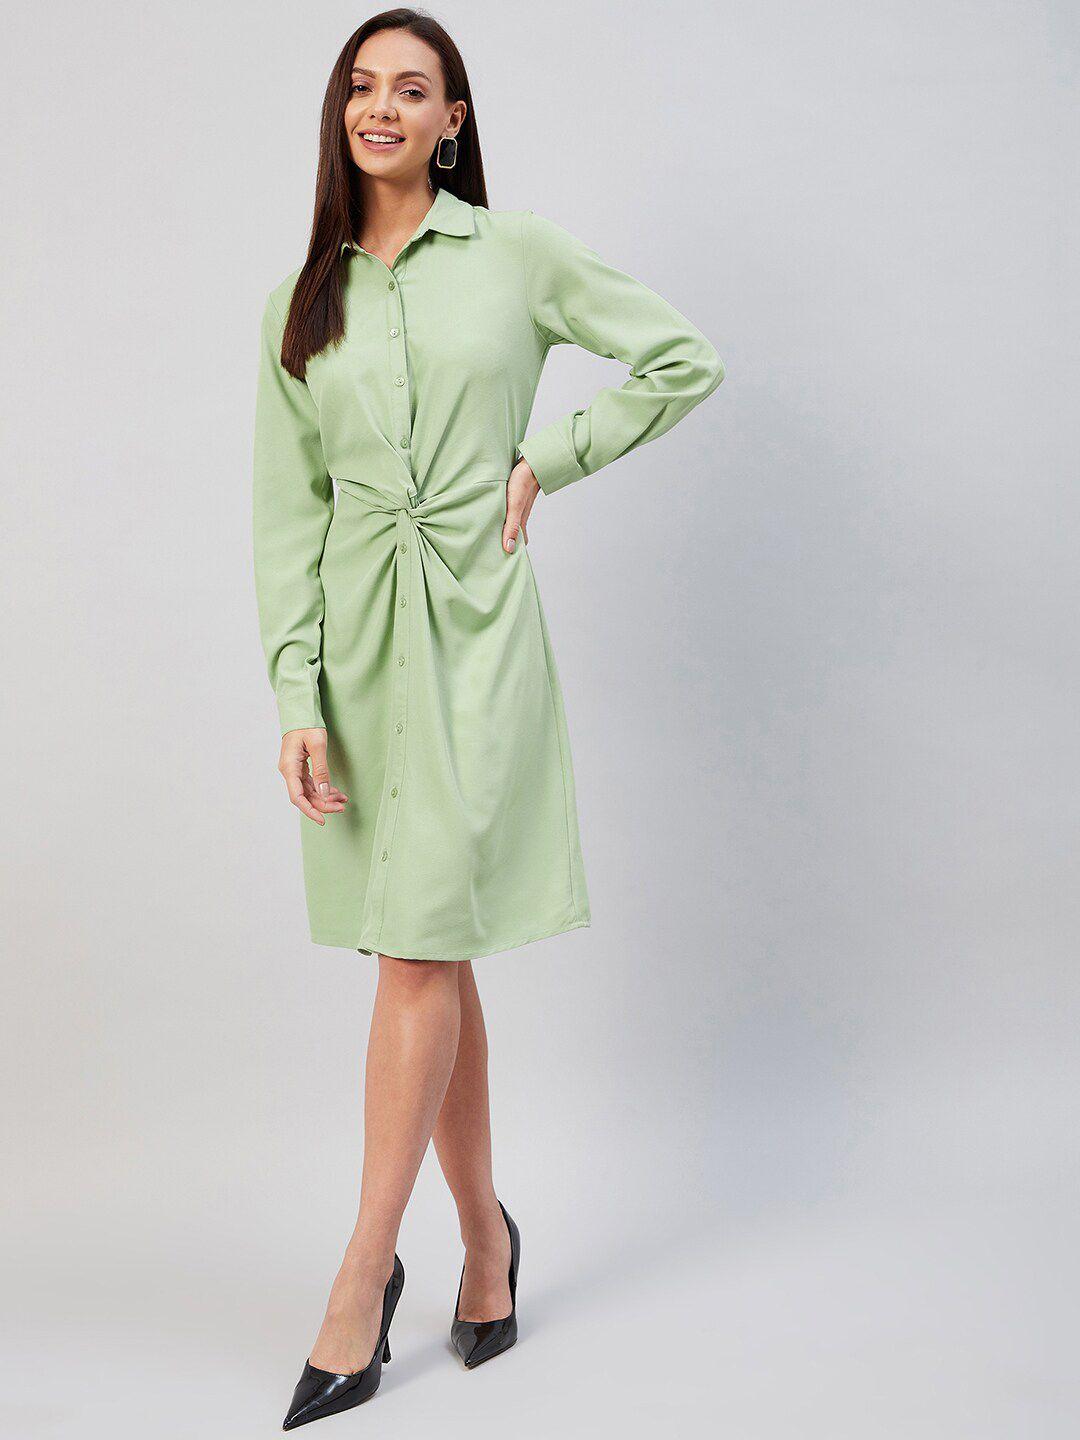 marie claire women green solid crepe shirt dress